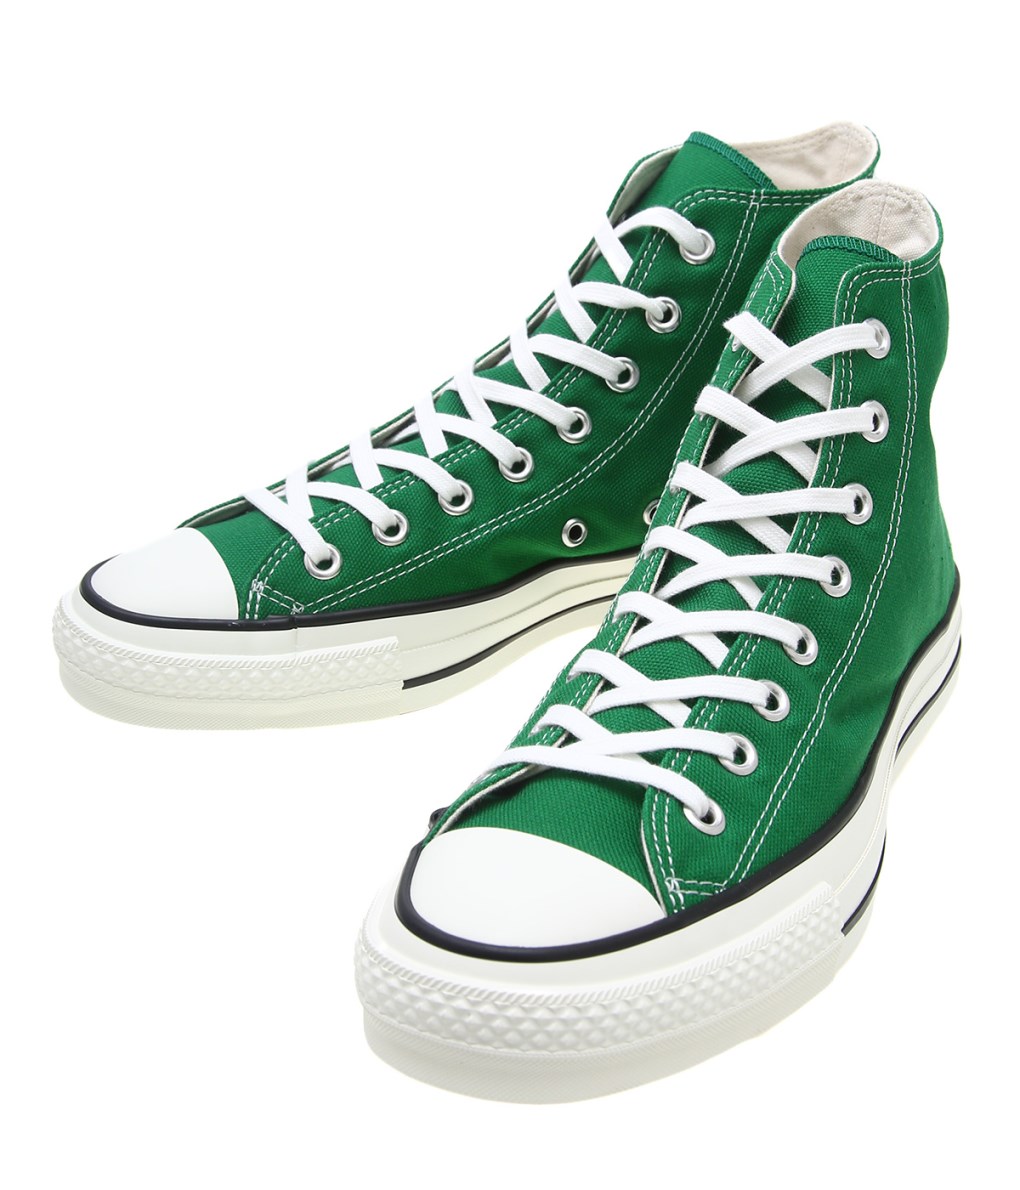 converse with green insole